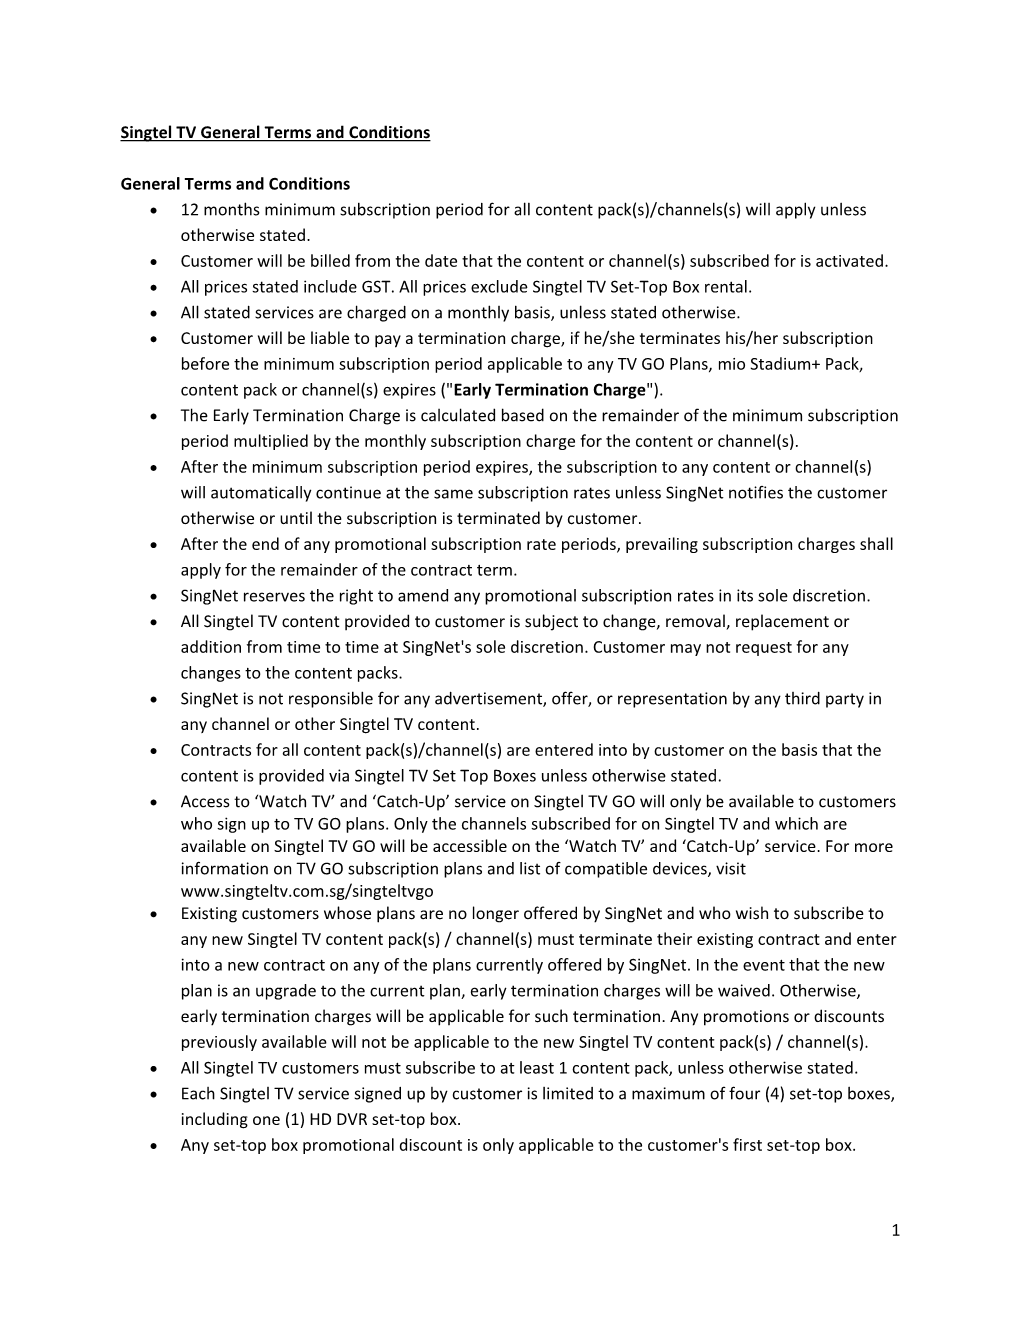 Mio TV Content Terms and Conditions